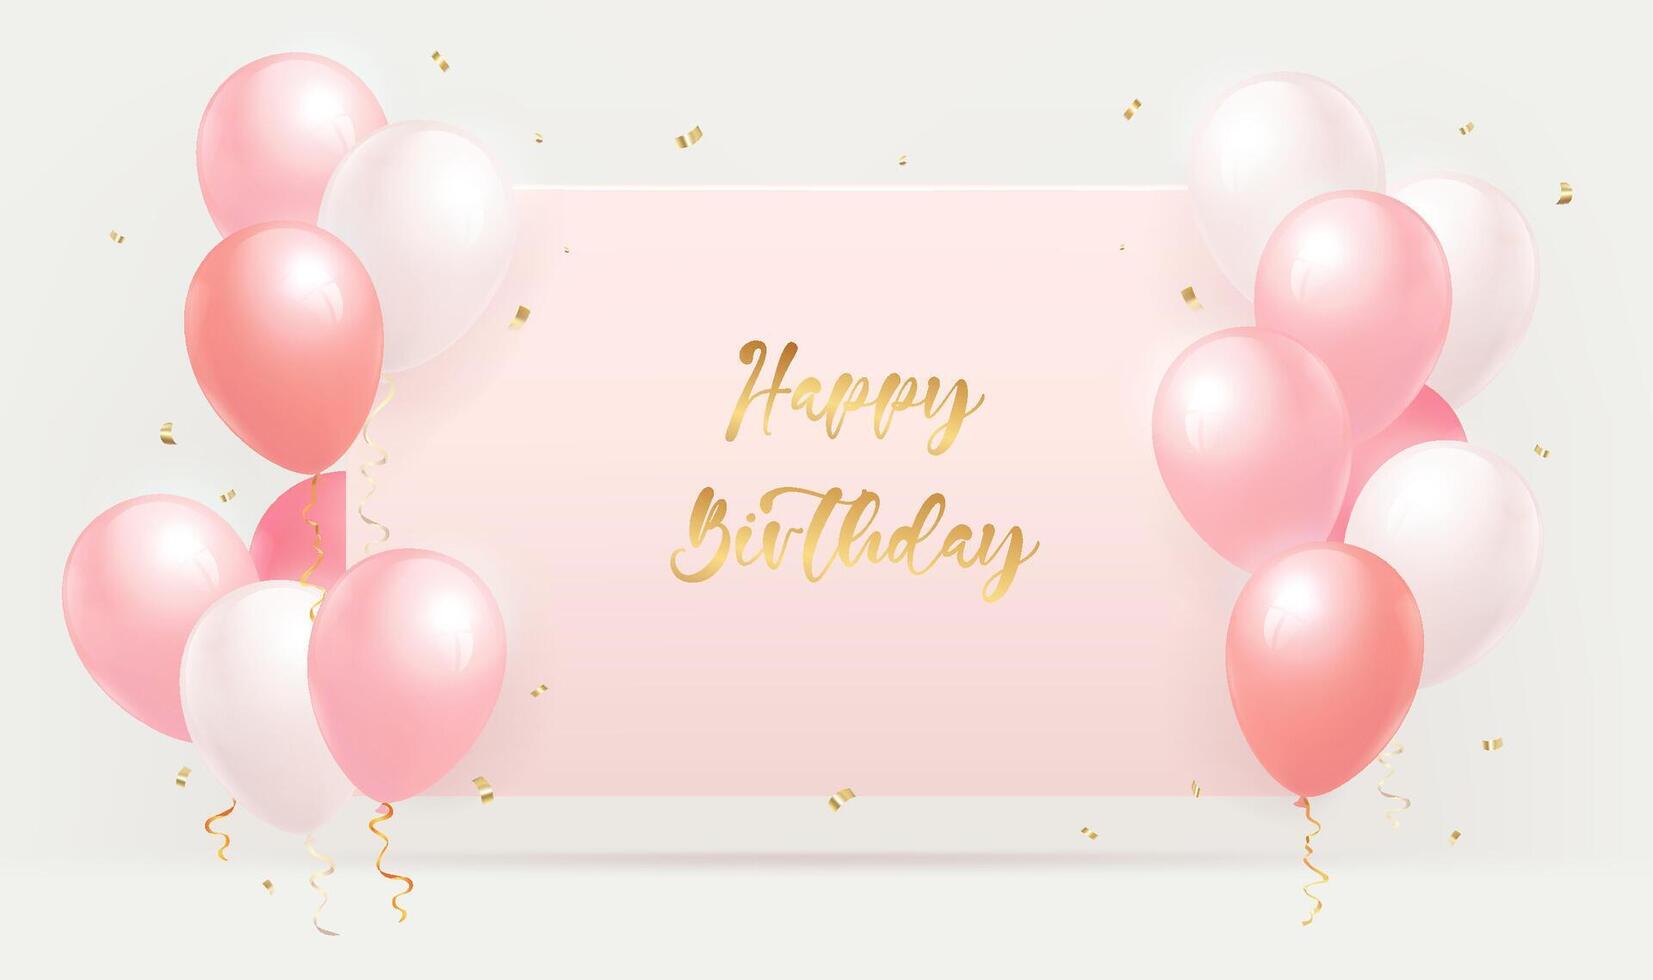 Elegant Happy Birthday party celebration card banner template with pink and white balloons vector